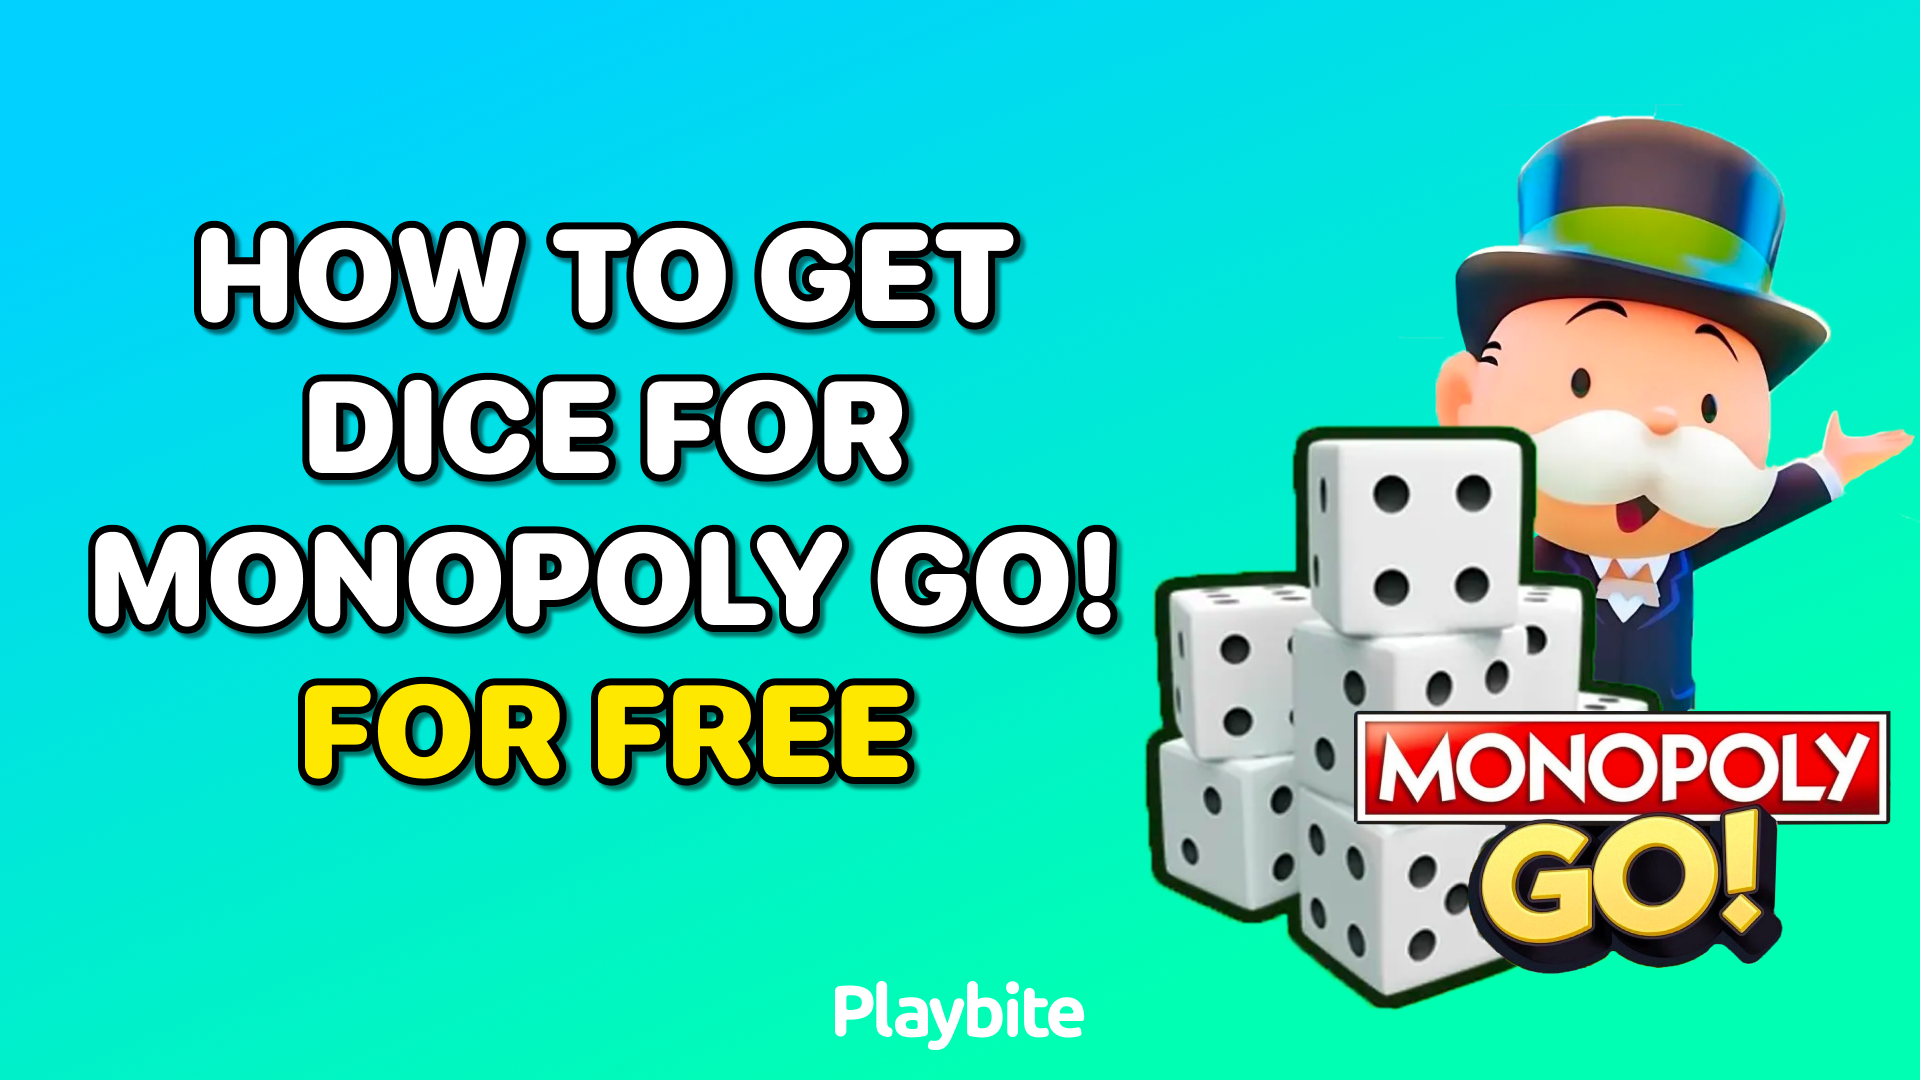 How to Get Dice for Monopoly Go for Free